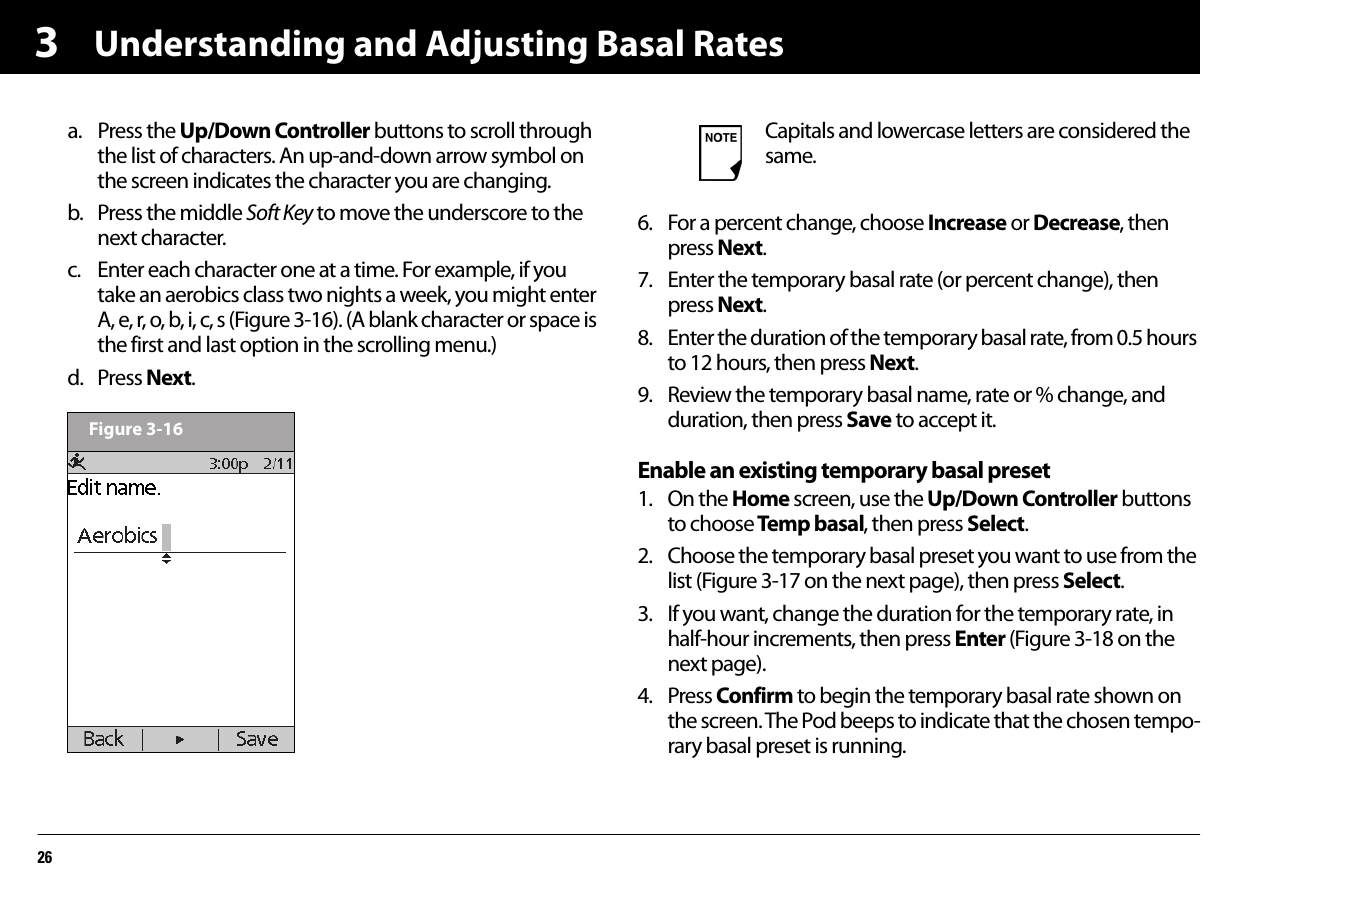 Understanding and Adjusting Basal Rates263a. Press the Up/Down Controller buttons to scroll through the list of characters. An up-and-down arrow symbol on the screen indicates the character you are changing.b. Press the middle Soft Key to move the underscore to the next character.c. Enter each character one at a time. For example, if you take an aerobics class two nights a week, you might enter A, e, r, o, b, i, c, s (Figure 3-16). (A blank character or space is the first and last option in the scrolling menu.)d. Press Next. 6. For a percent change, choose Increase or Decrease, then press Next.7. Enter the temporary basal rate (or percent change), then press Next.8. Enter the duration of the temporary basal rate, from 0.5 hours to 12 hours, then press Next.9. Review the temporary basal name, rate or % change, and duration, then press Save to accept it.Enable an existing temporary basal preset1. On the Home screen, use the Up/Down Controller buttons to choose Temp basal, then press Select.2. Choose the temporary basal preset you want to use from the list (Figure 3-17 on the next page), then press Select.3. If you want, change the duration for the temporary rate, in half-hour increments, then press Enter (Figure 3-18 on the next page).4. Press Confirm to begin the temporary basal rate shown on the screen. The Pod beeps to indicate that the chosen tempo-rary basal preset is running.Figure 3-16Capitals and lowercase letters are considered the same.